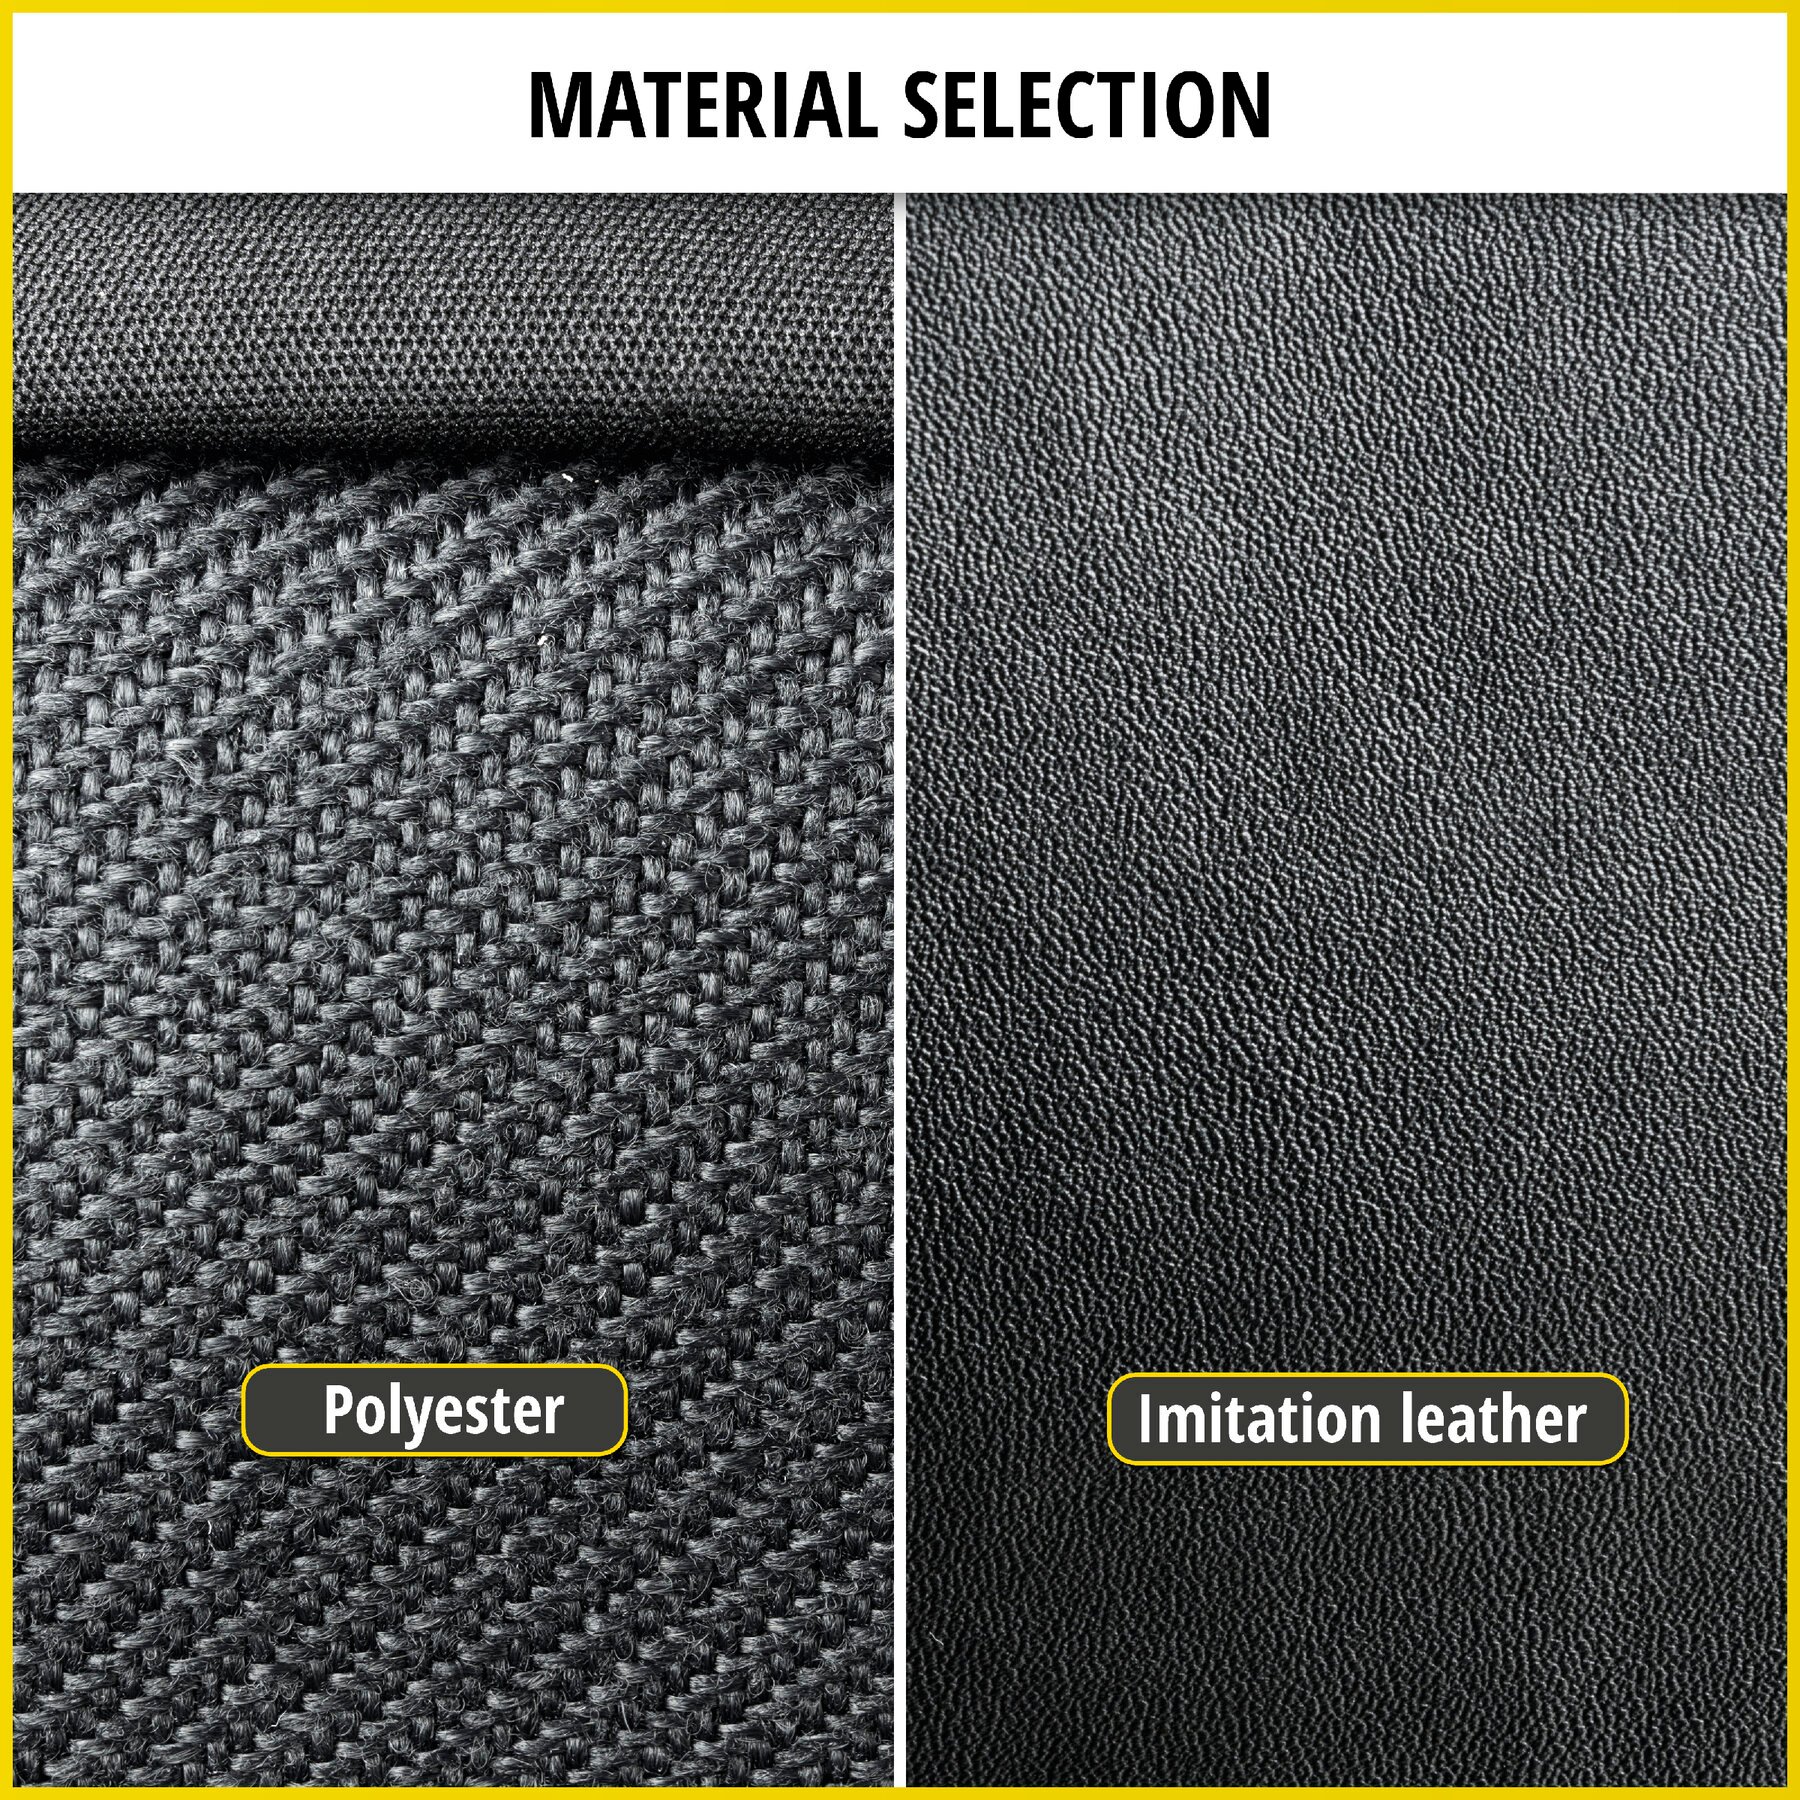 Seat cover made of fabric for Peugeot Partner, 2 single seat covers front